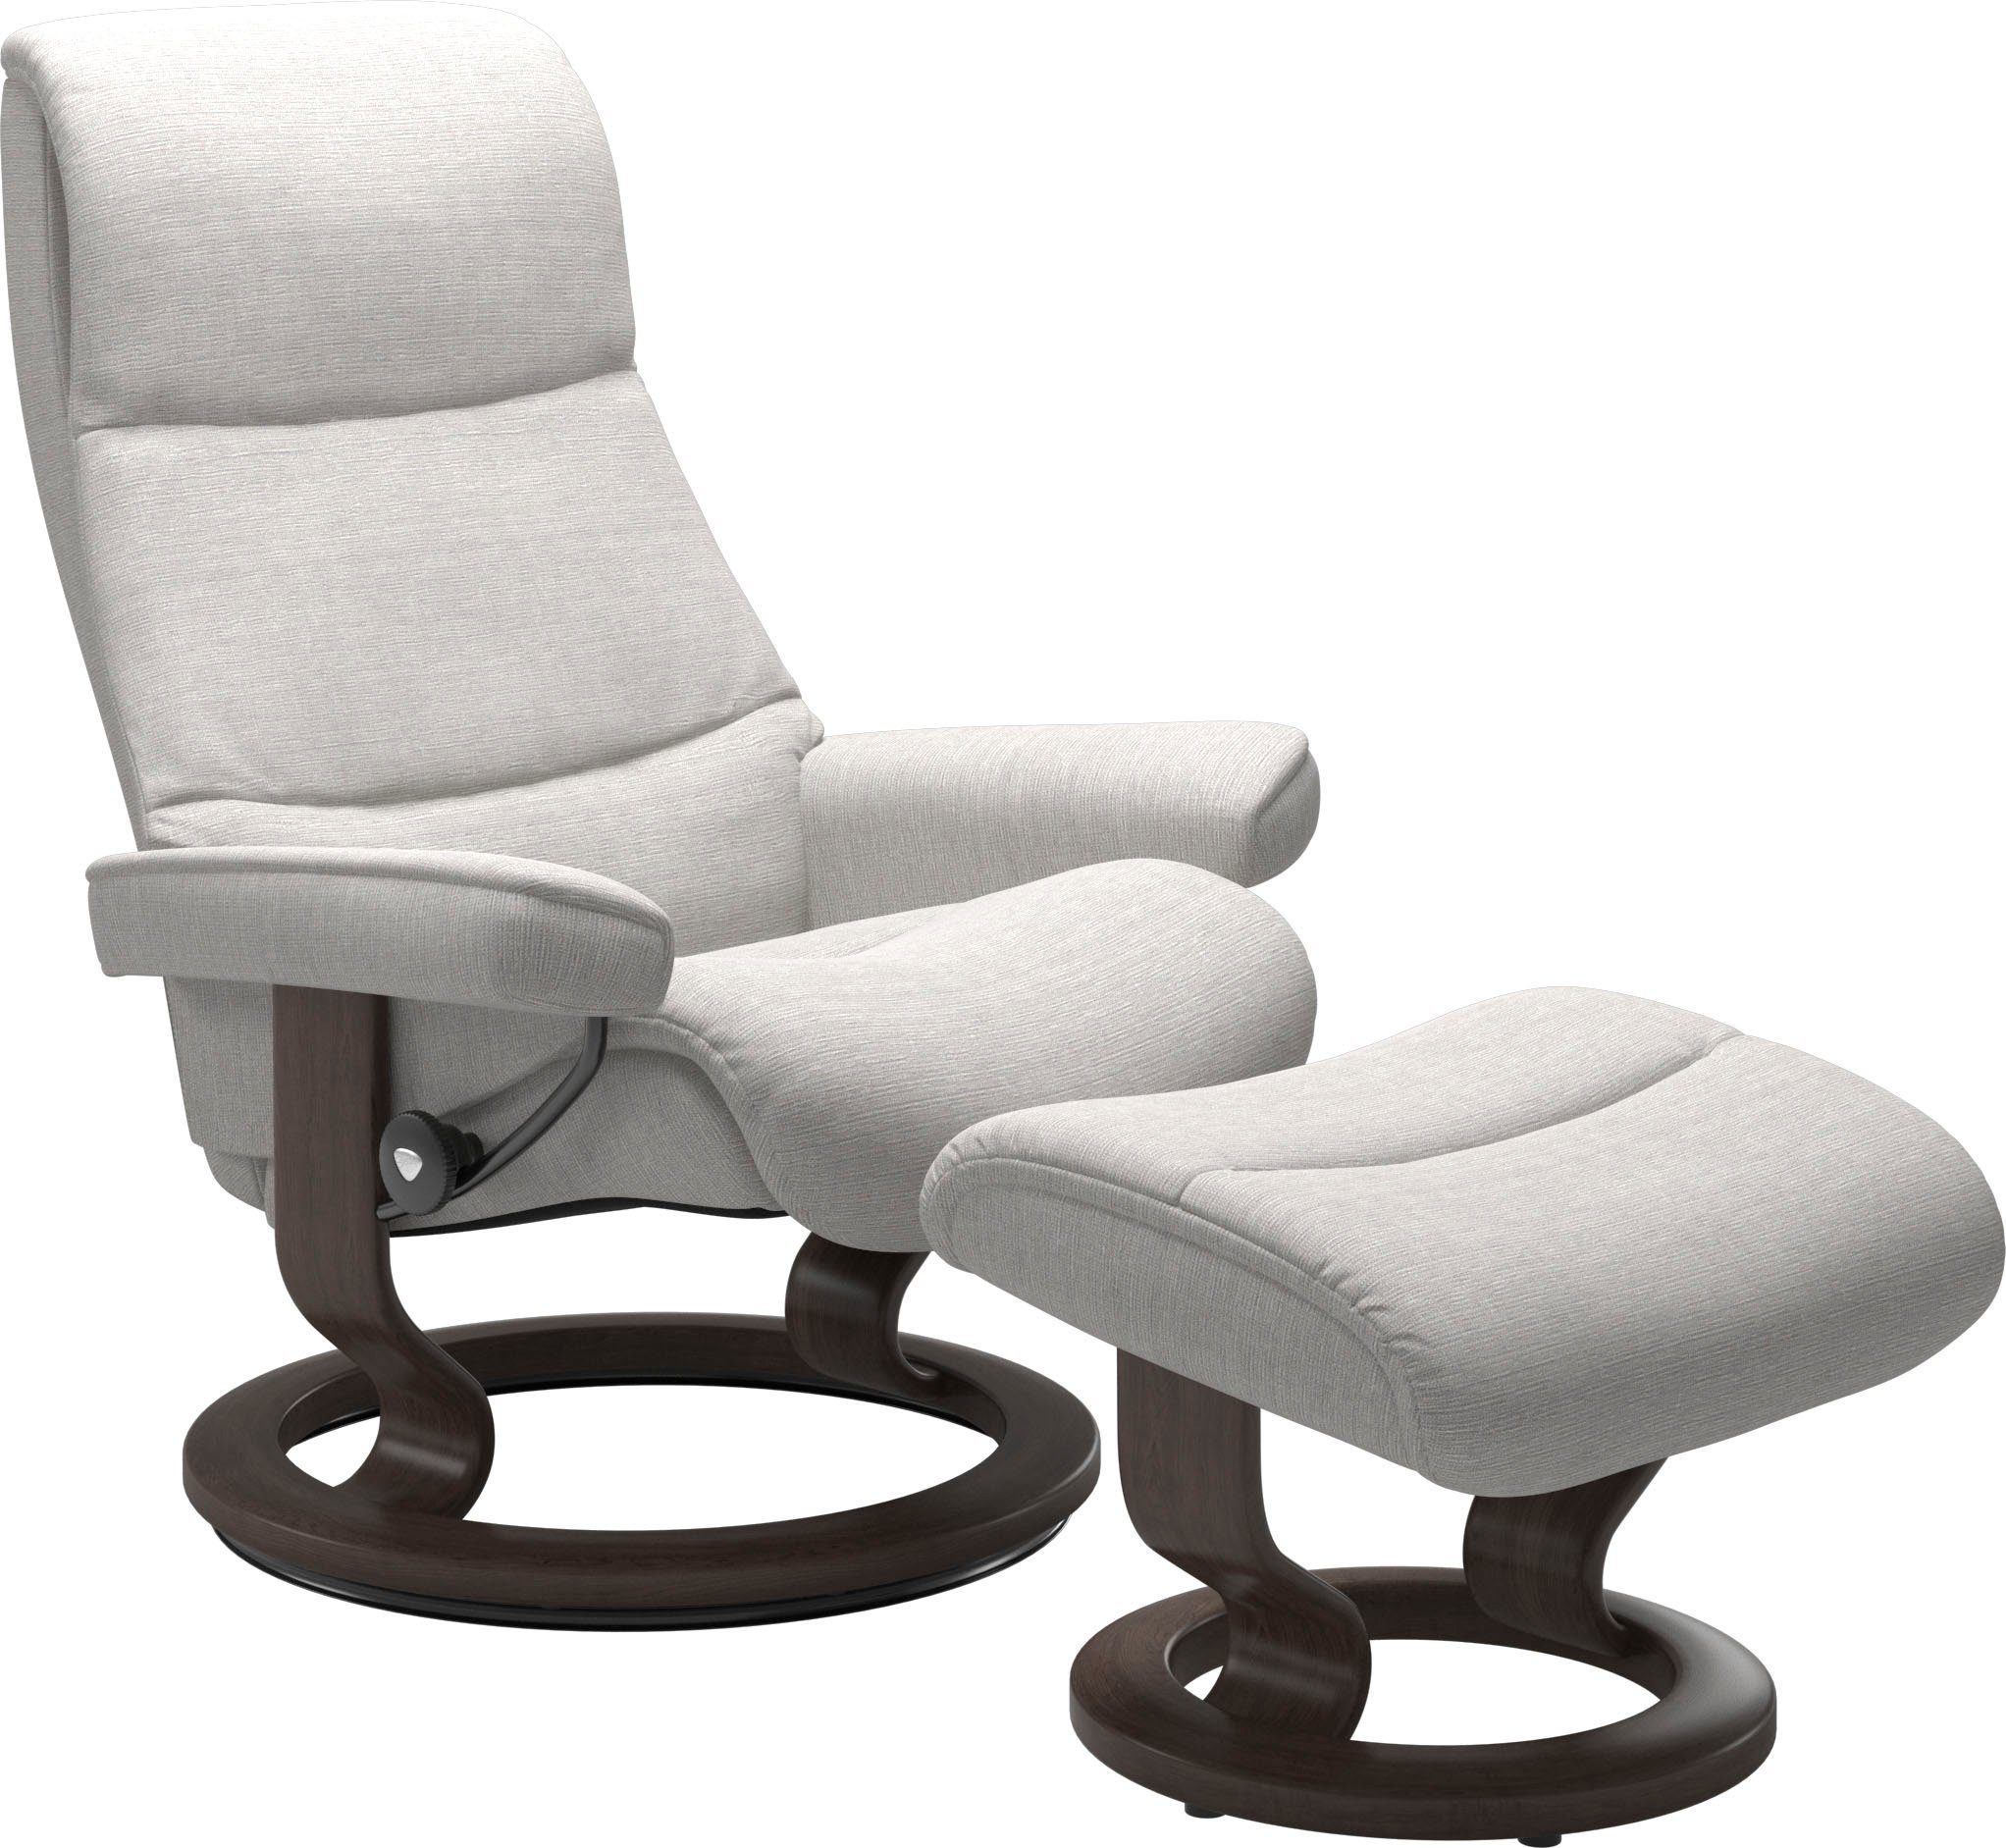 Stressless® Relaxsessel View, mit Classic Base, Größe M,Gestell Wenge | Funktionssessel